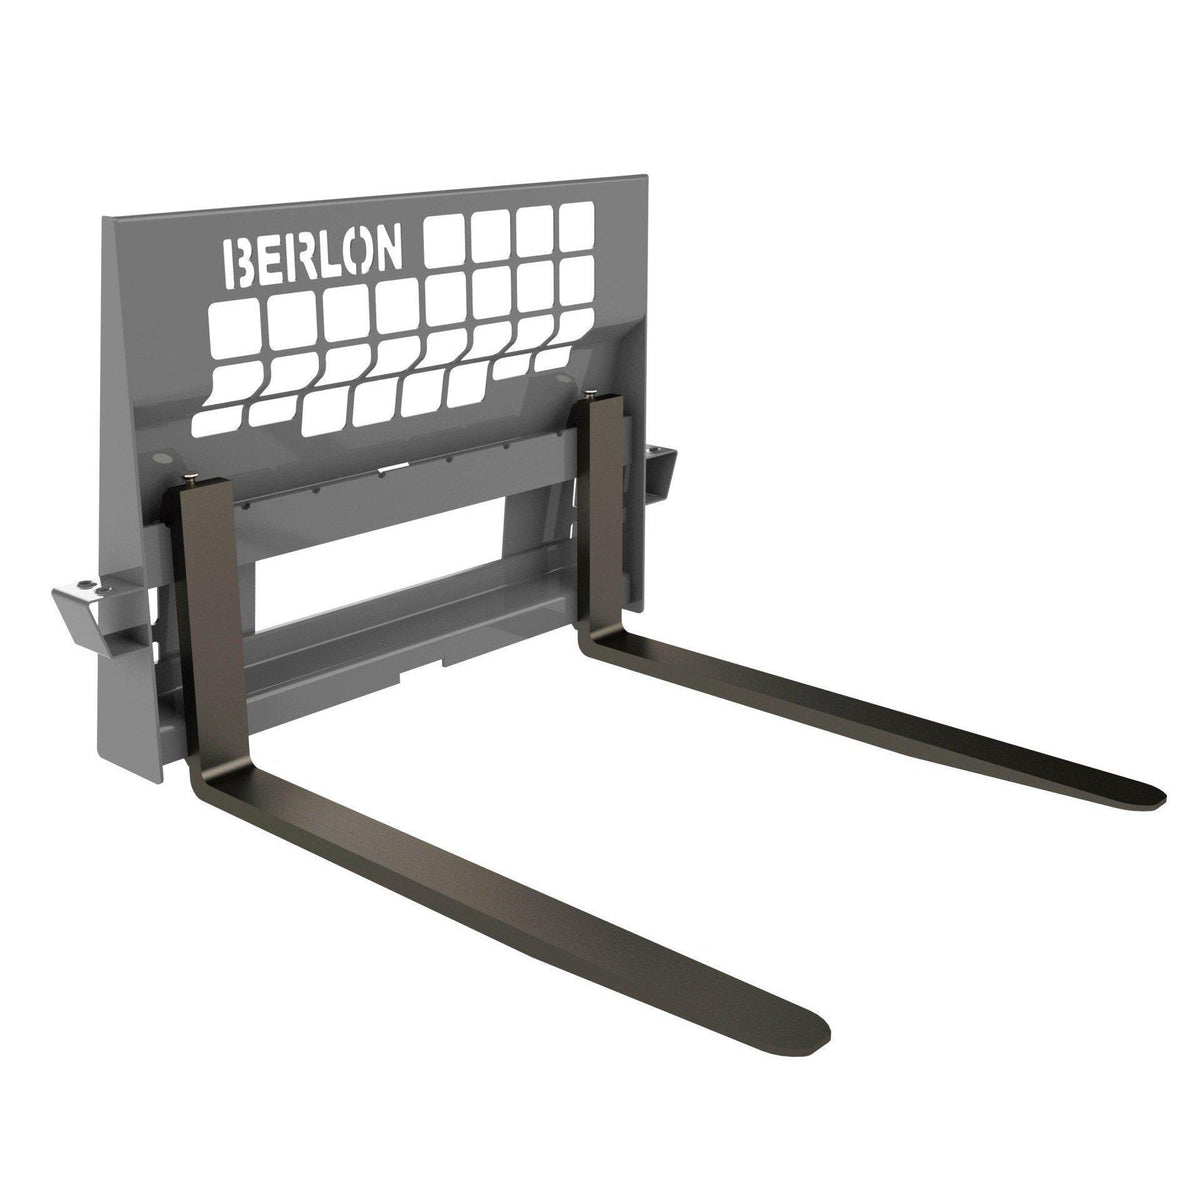 heavy duty with 10,000 lbs capacity pallet forks from berlon